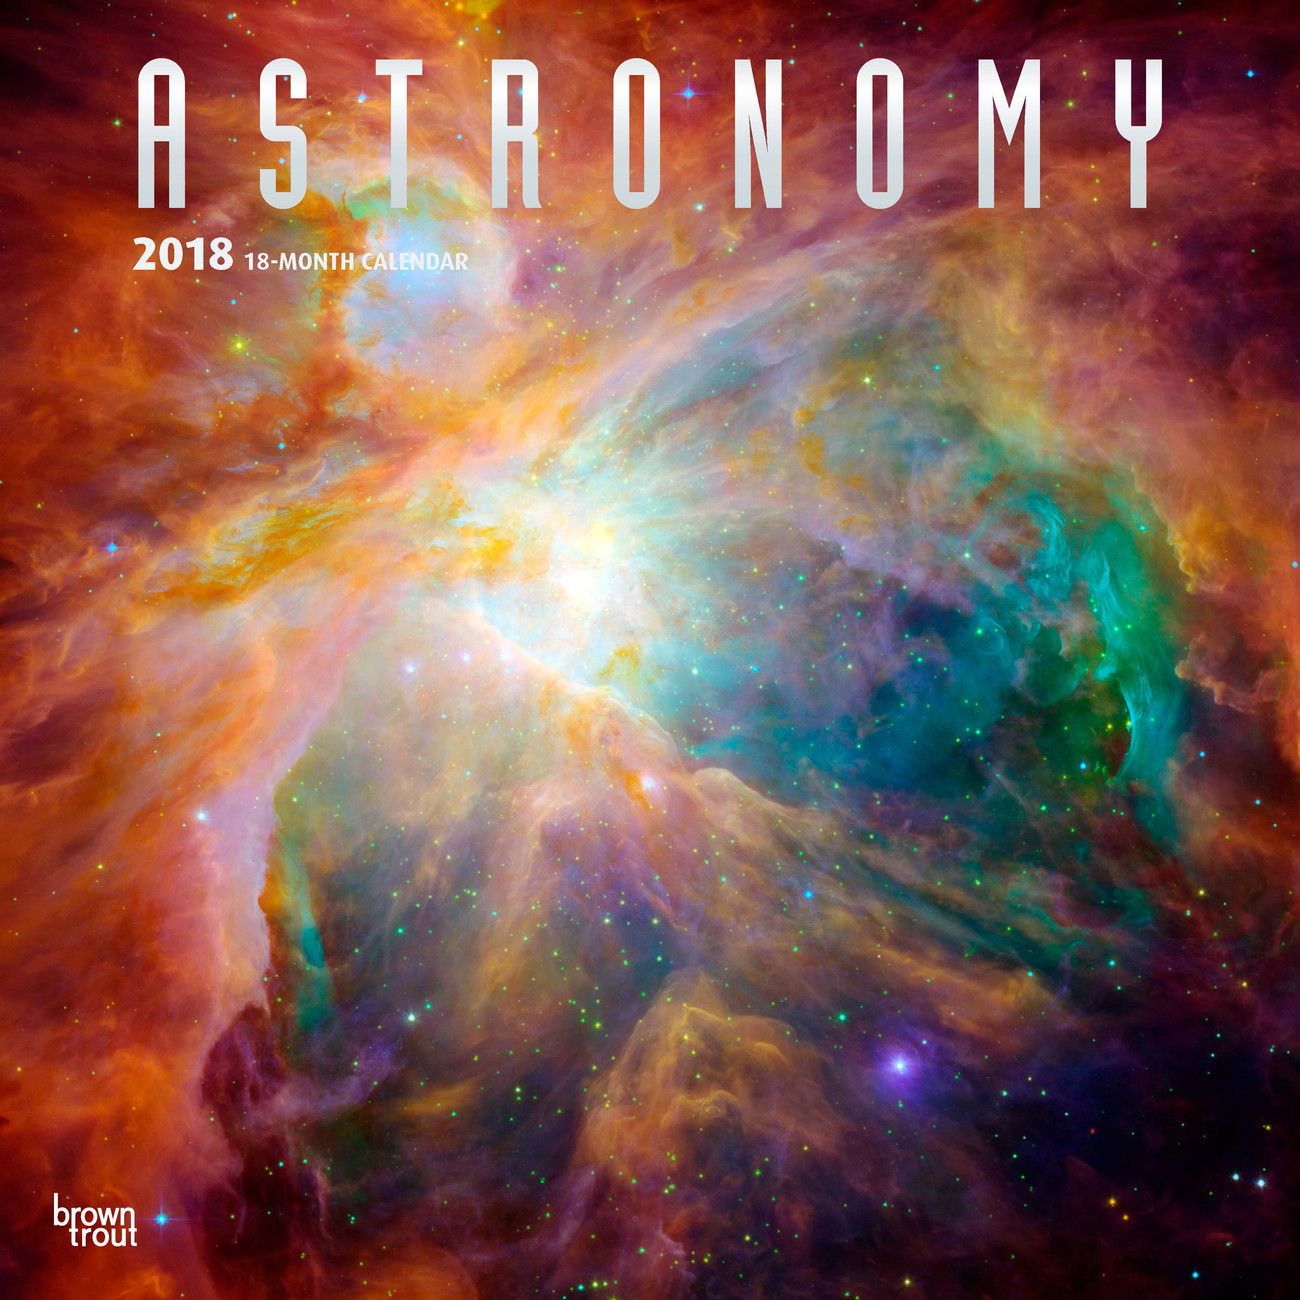 Astronomy - Calendars 2021 on UKposters/EuroPosters